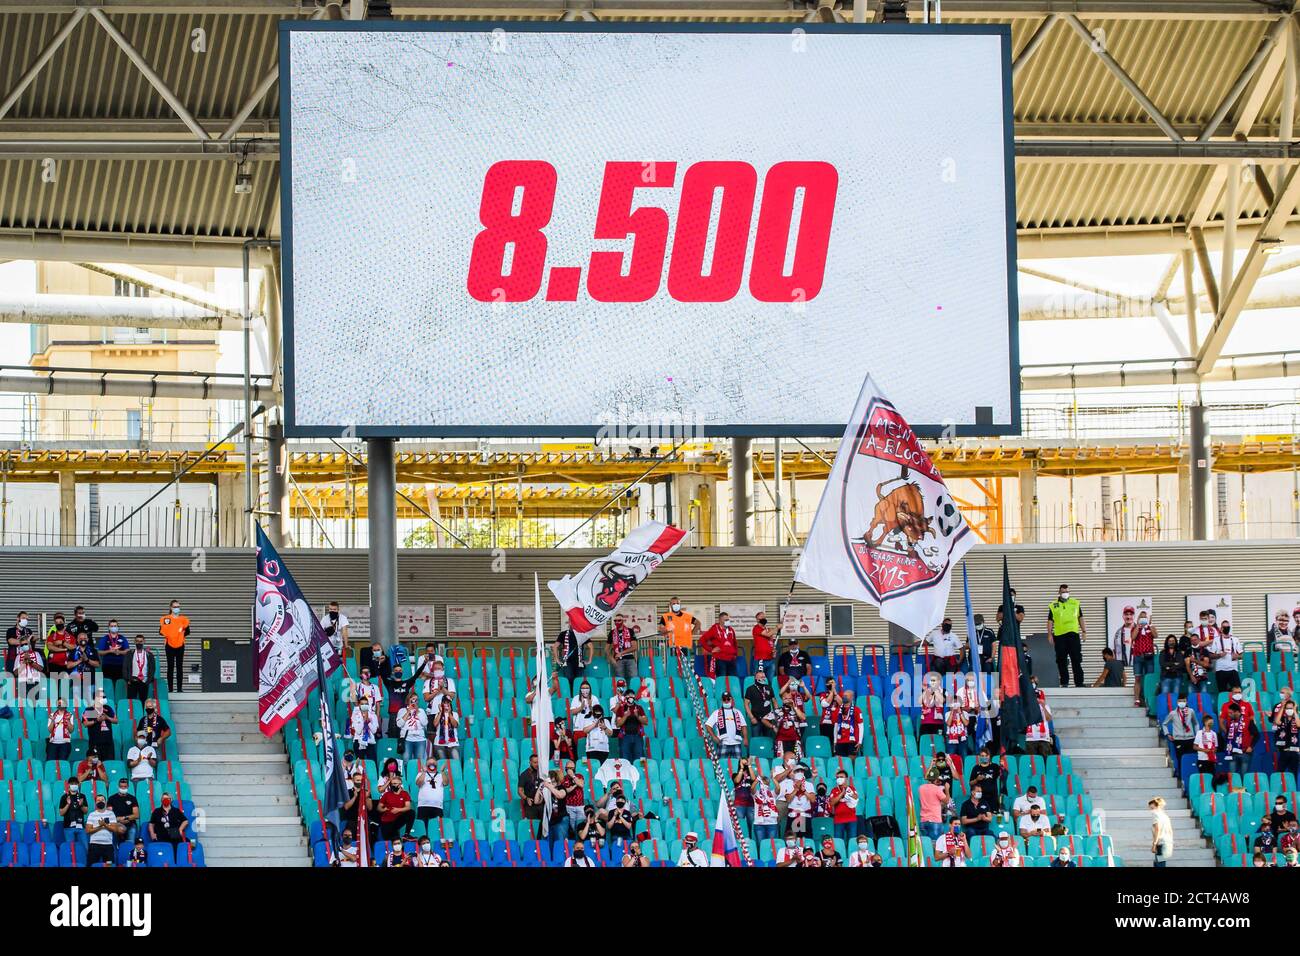 Leipzig, Germany. 20th Sep, 2020. A screen displays a total of 8,500 fans watching the German Bundesliga match between RB Leipzig and 1.FSV Mainz 05 in Leipzig, Germany, Sept. 20, 2020. Credit: Kevin Voigt/Xinhua/Alamy Live News Stock Photo